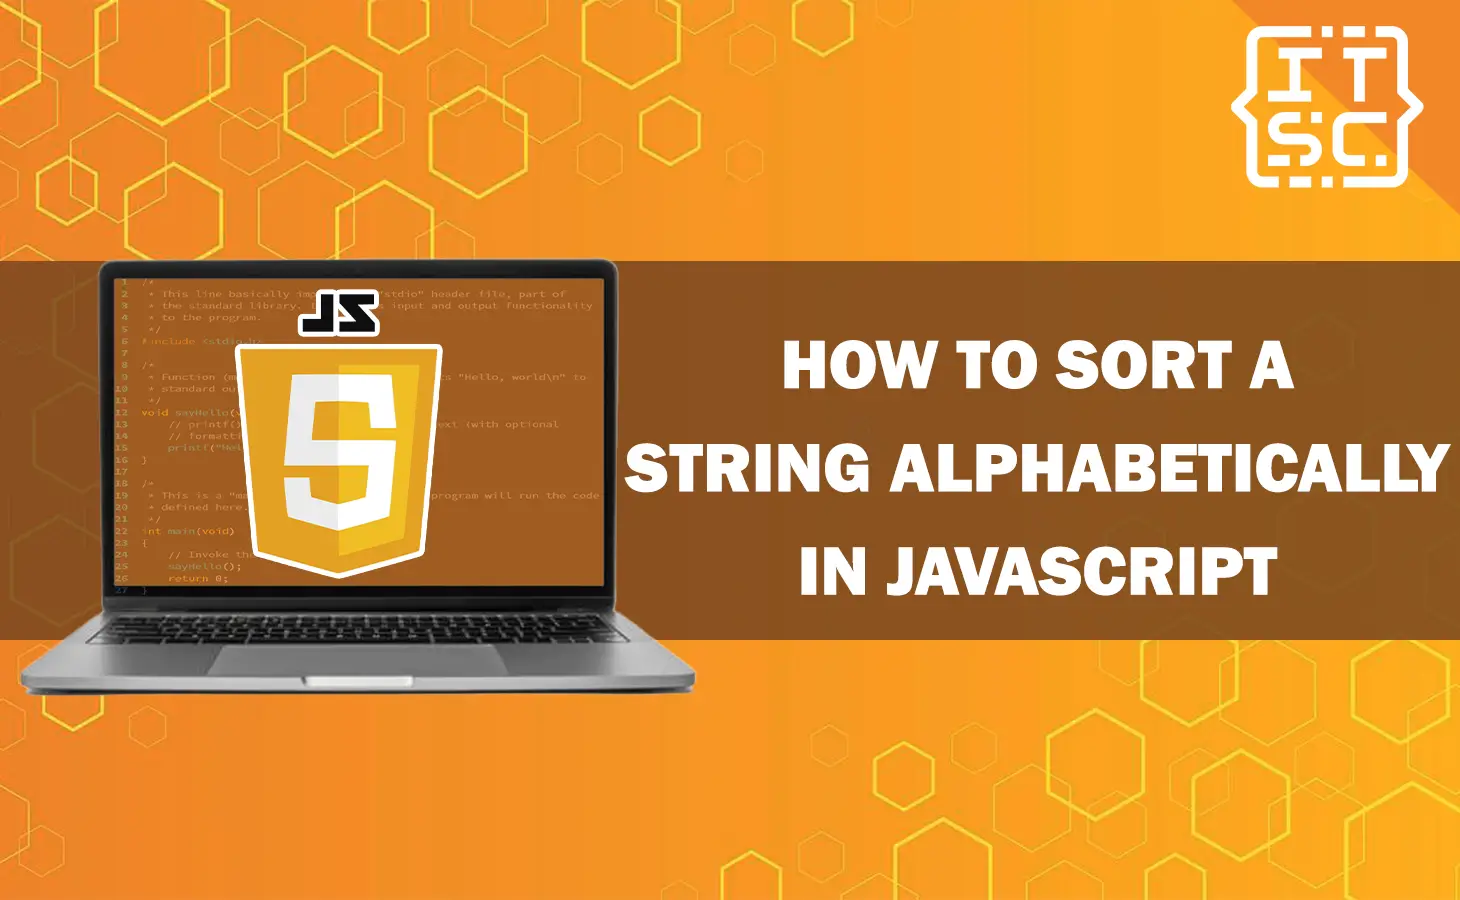 How to sort a string alphabetically in JavaScript